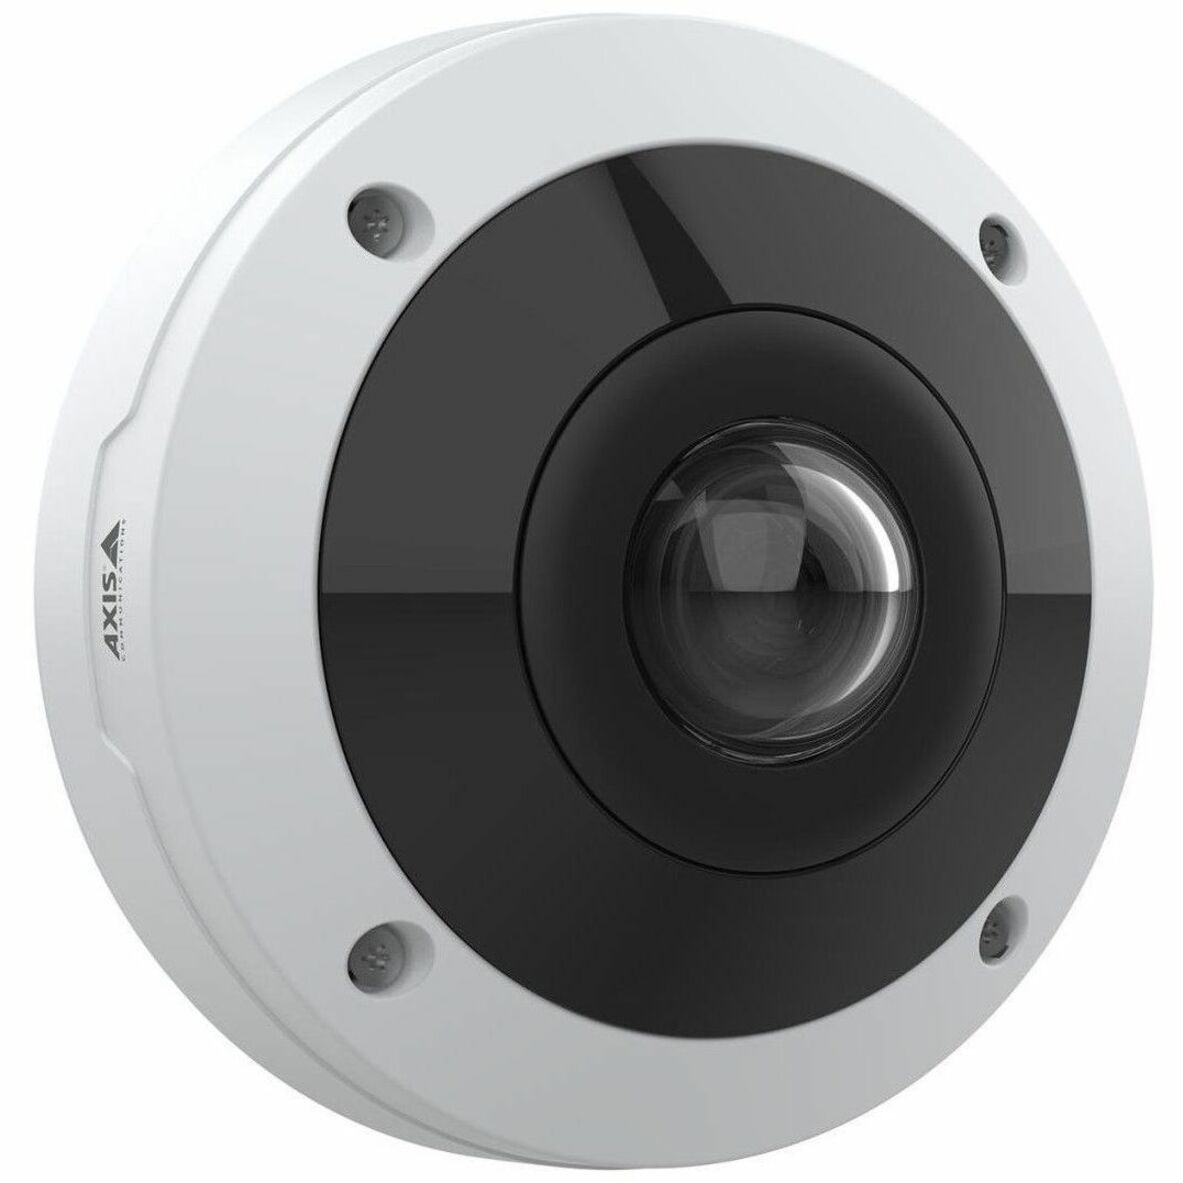 AXIS 02510-001 AXIS M4317-PLVE Panoramic Camera, 6 Megapixel, Outdoor, 182° Field of View, Night Vision, PoE